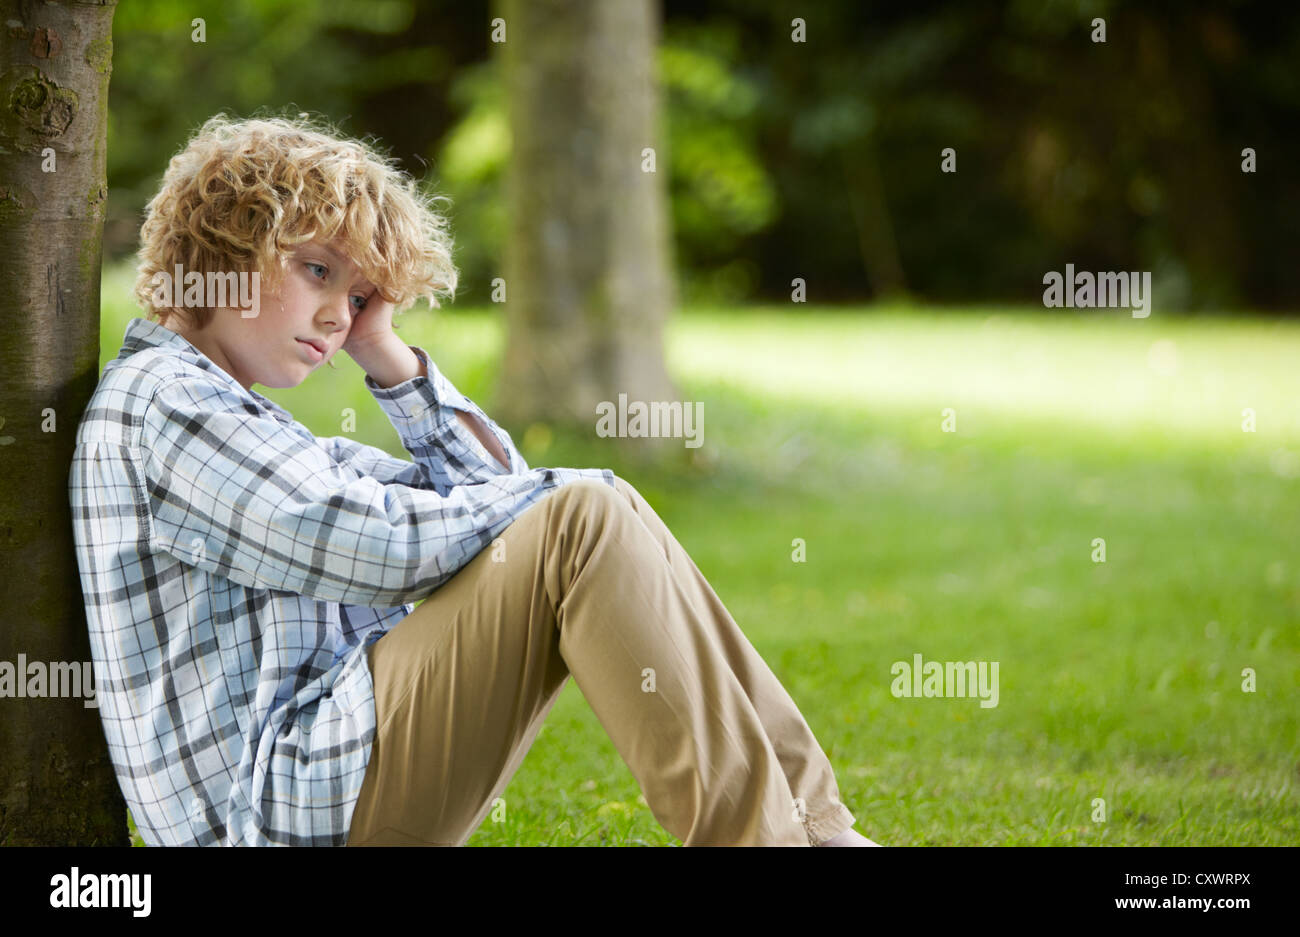 Sad Looking Boy Leaning Against Tree Stock Photo